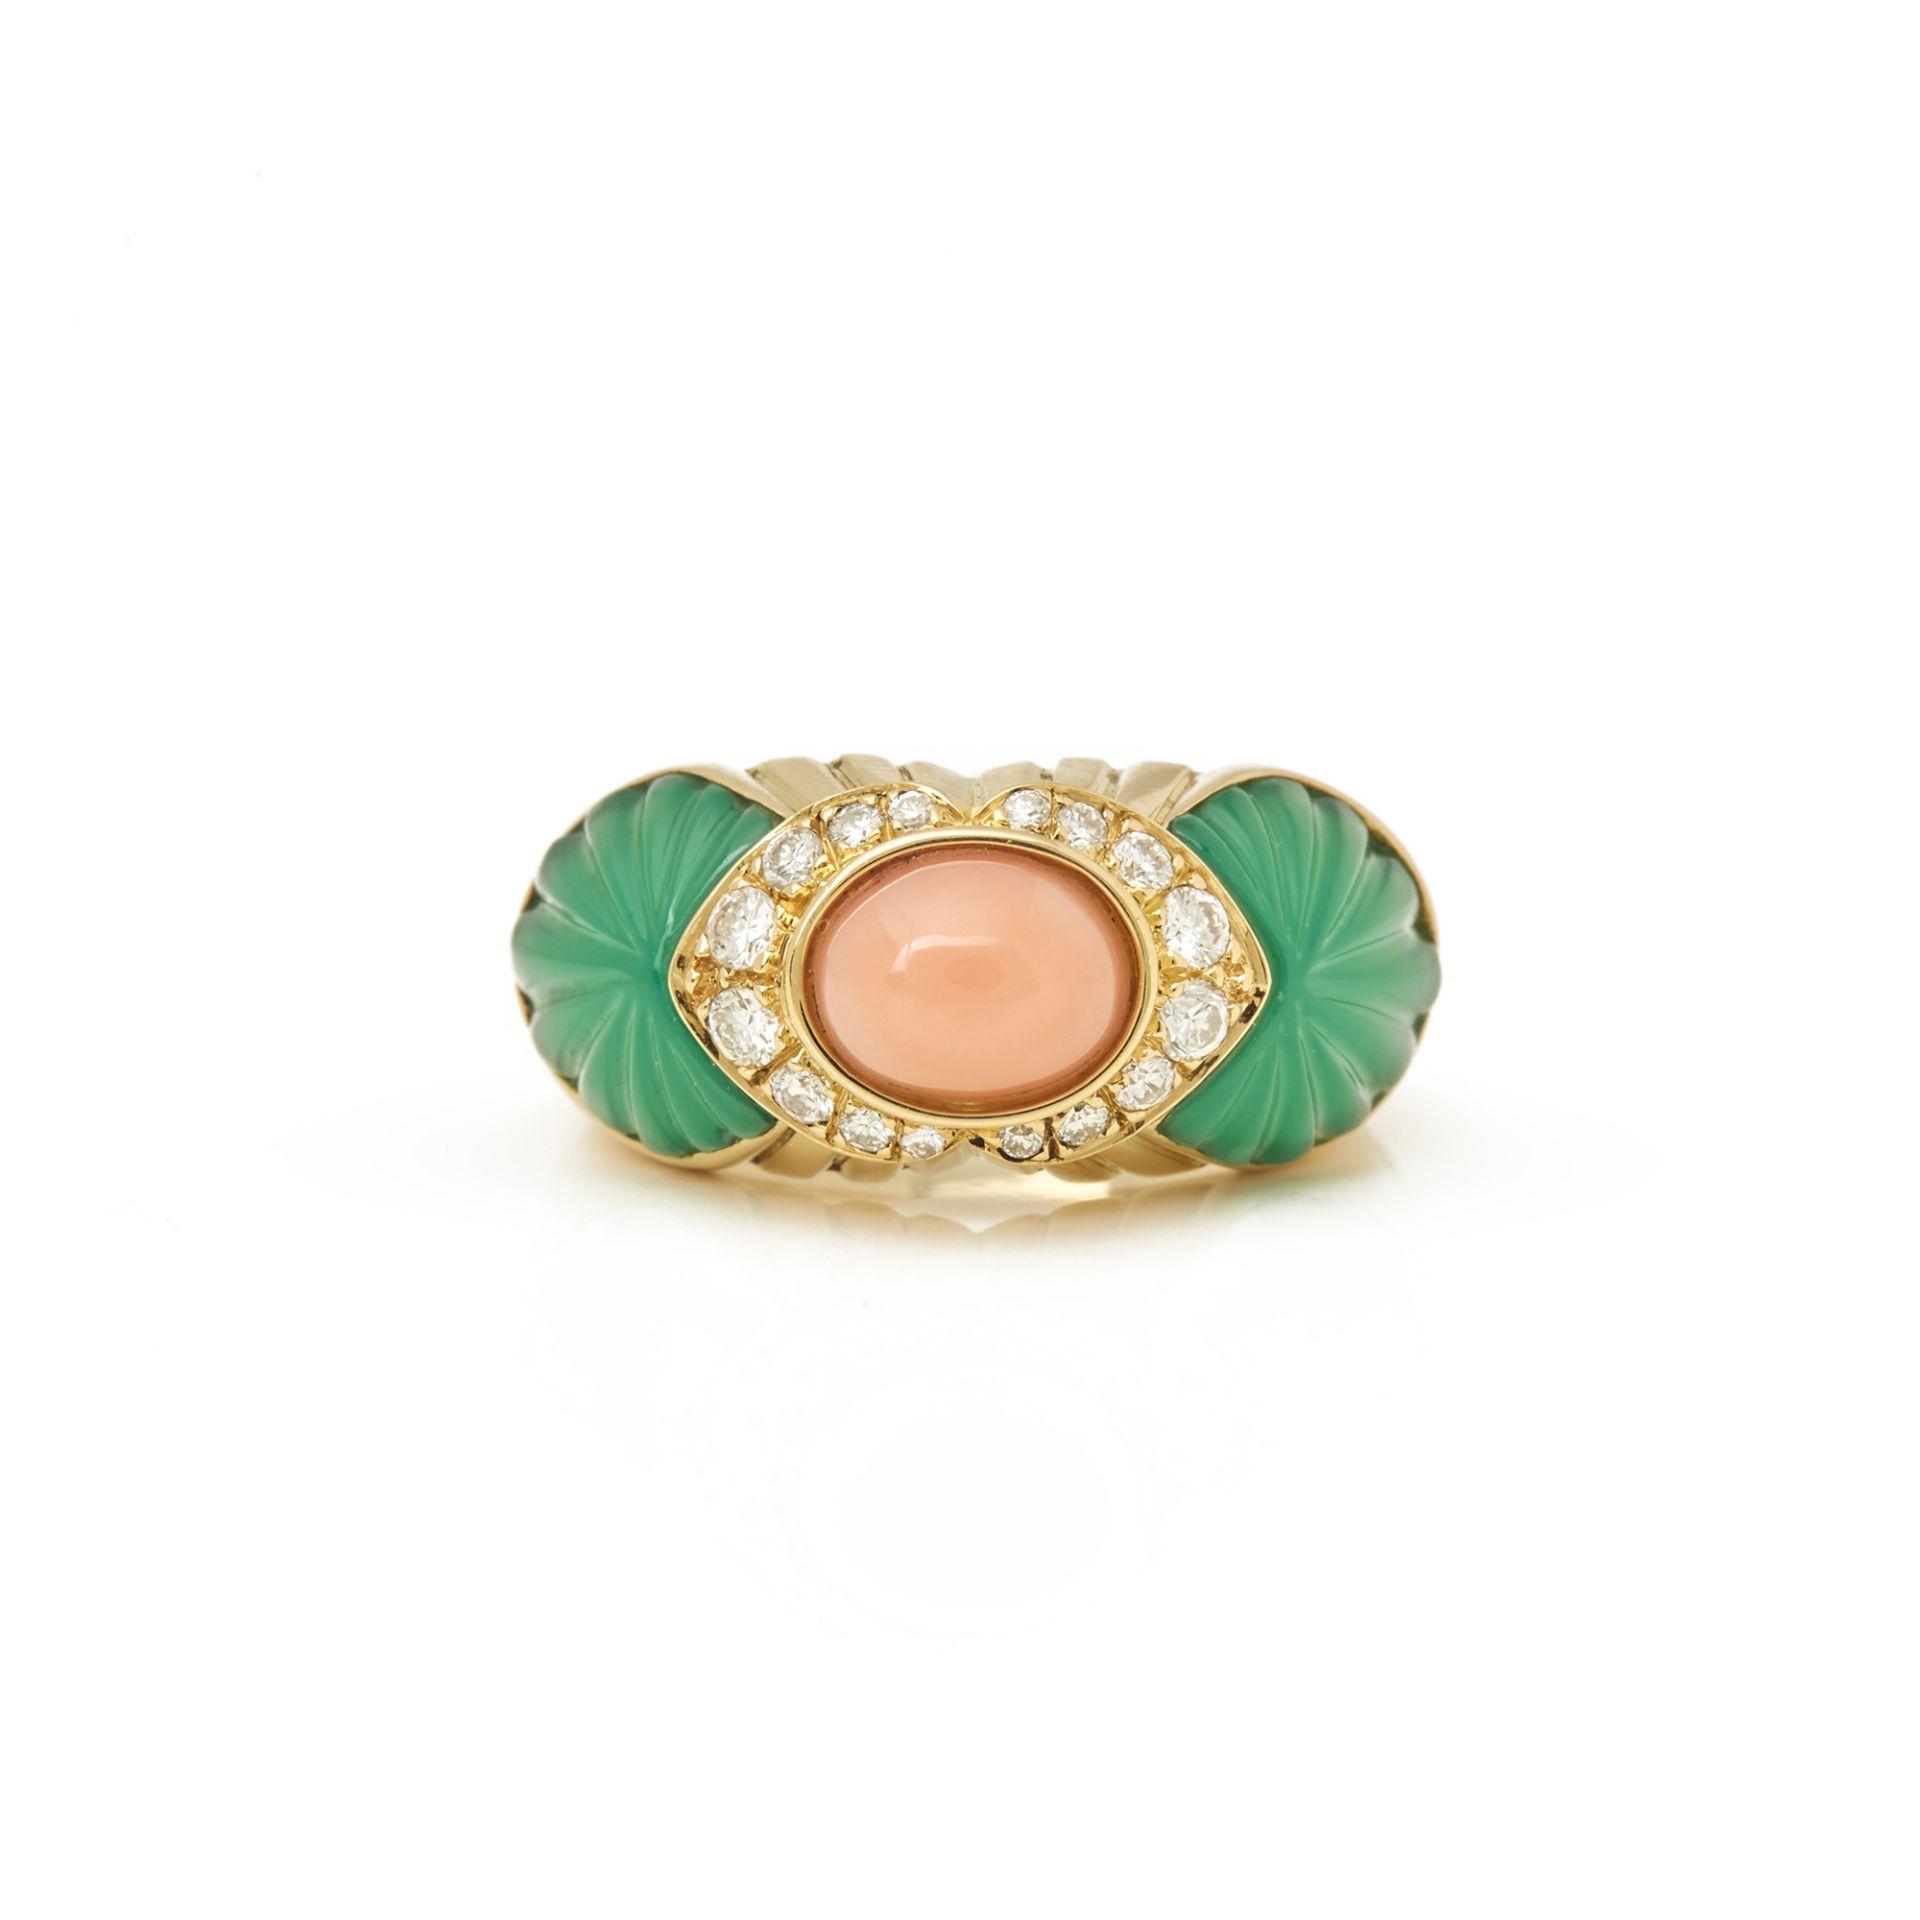 Cartier 18k Yellow Gold Chrysoprase, Coral & Diamond Ring - Image 7 of 7